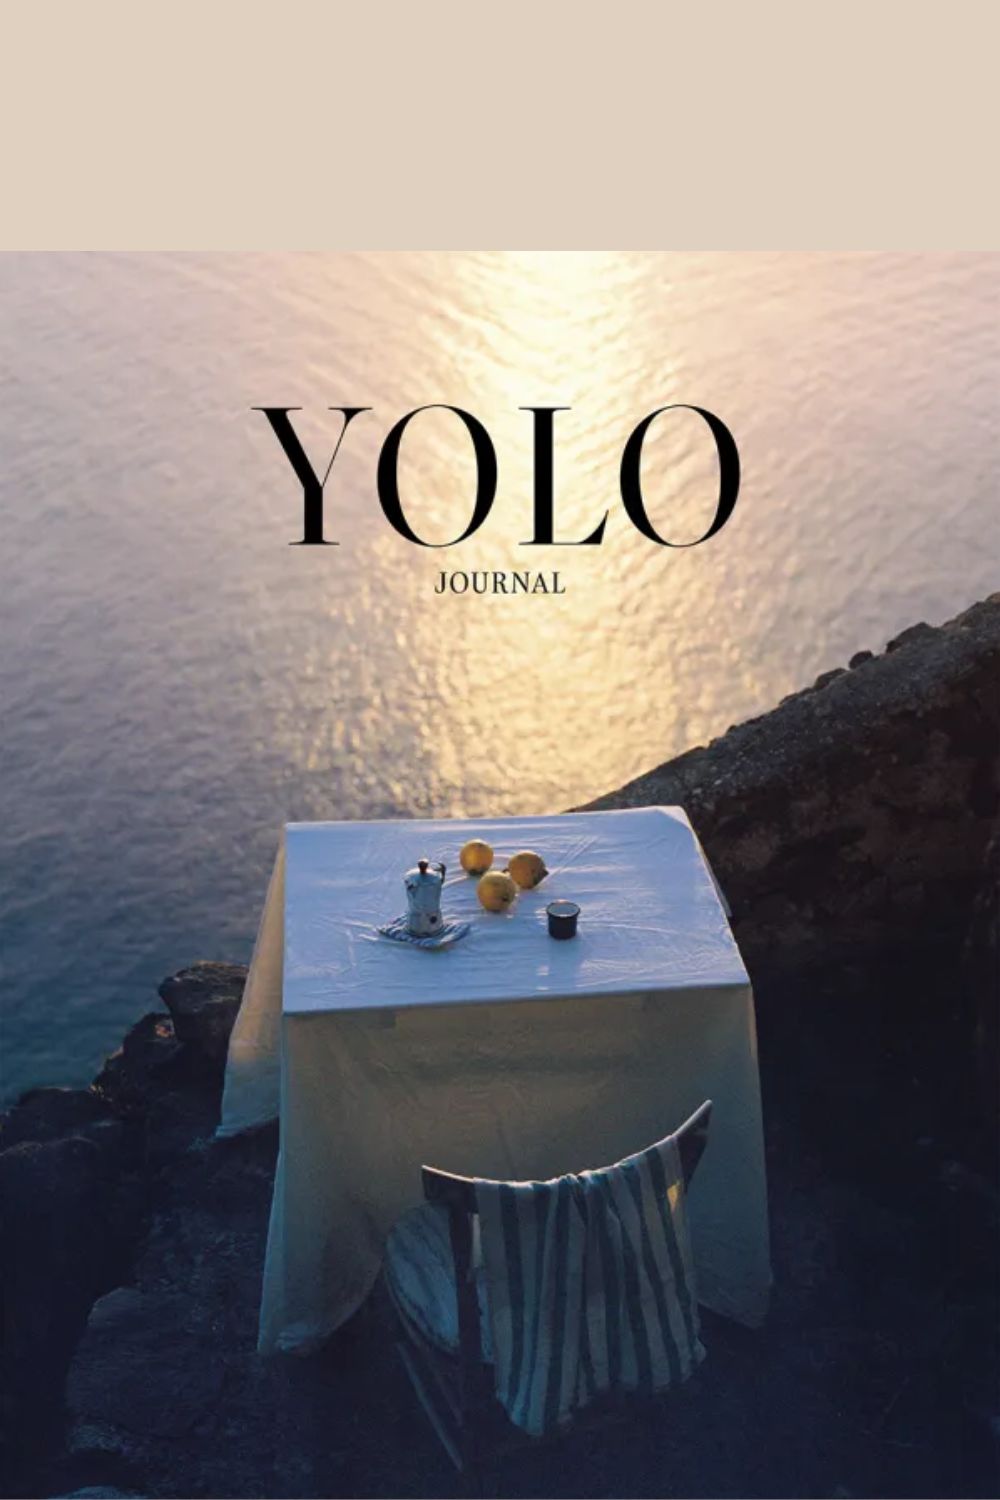 Yolo Journal Issue 15 cover (table and chair on a cliff overlooking the sea)